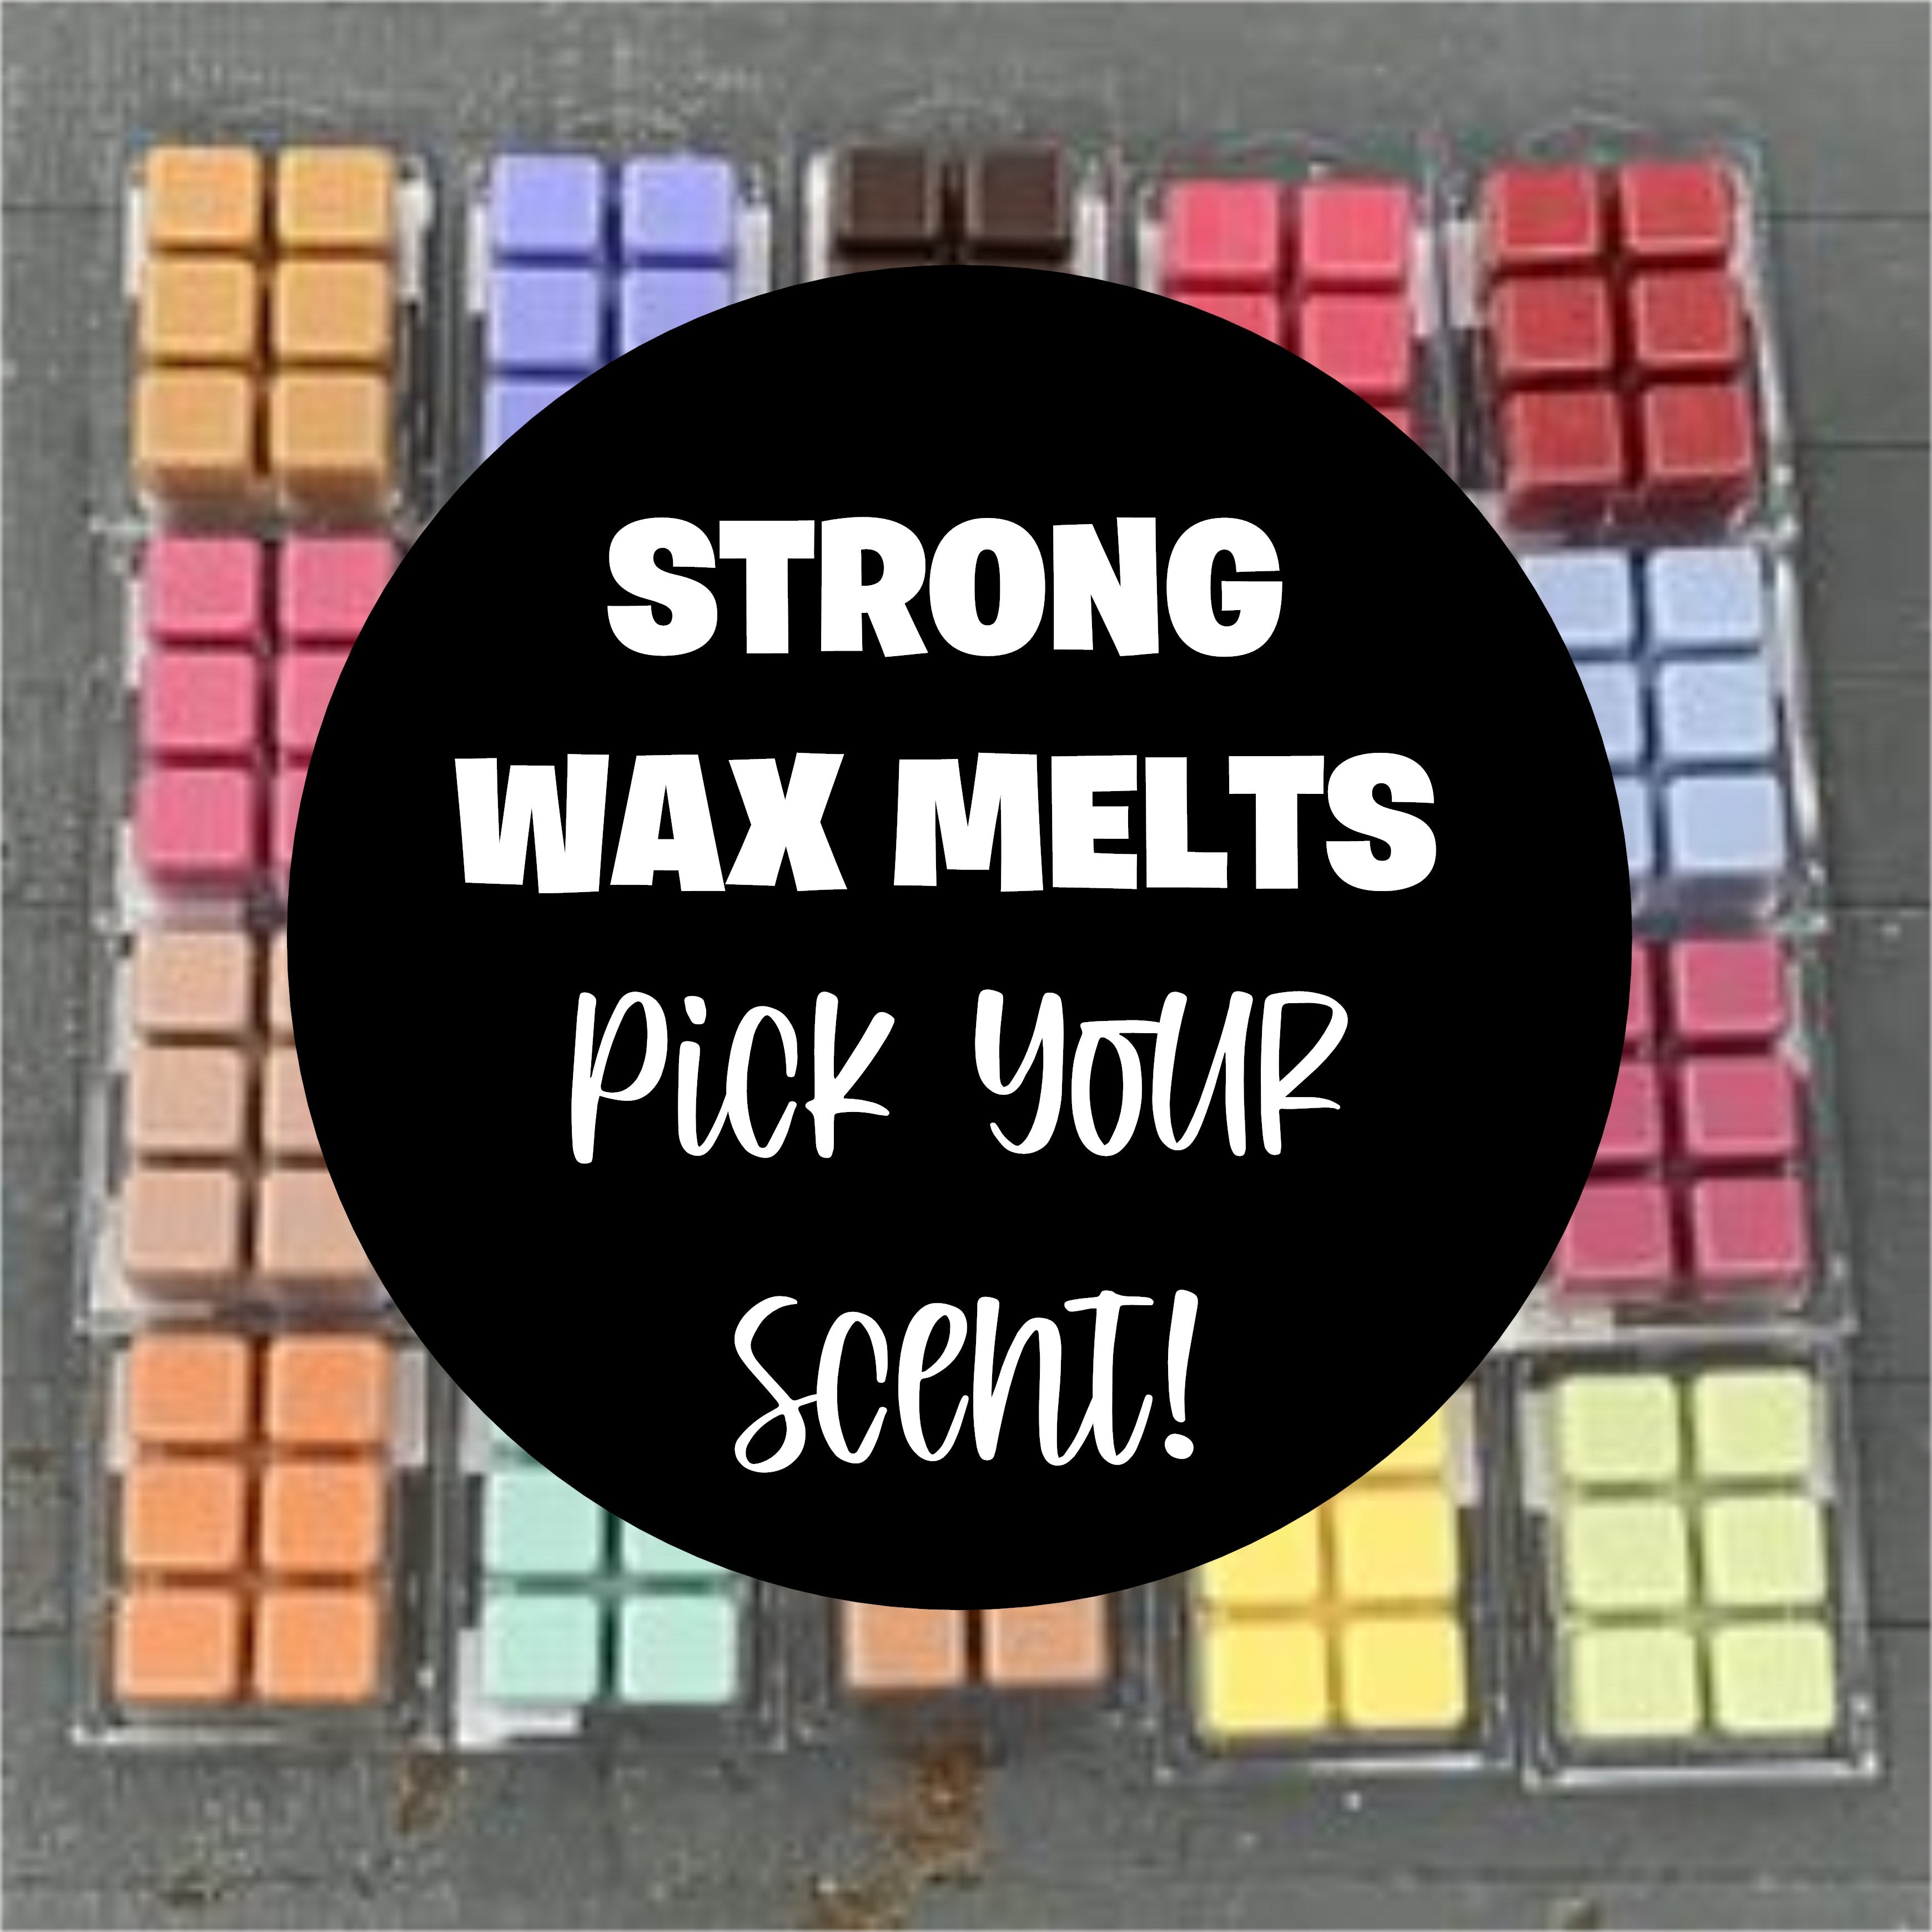 Expressions Highly Scented Wax Melts